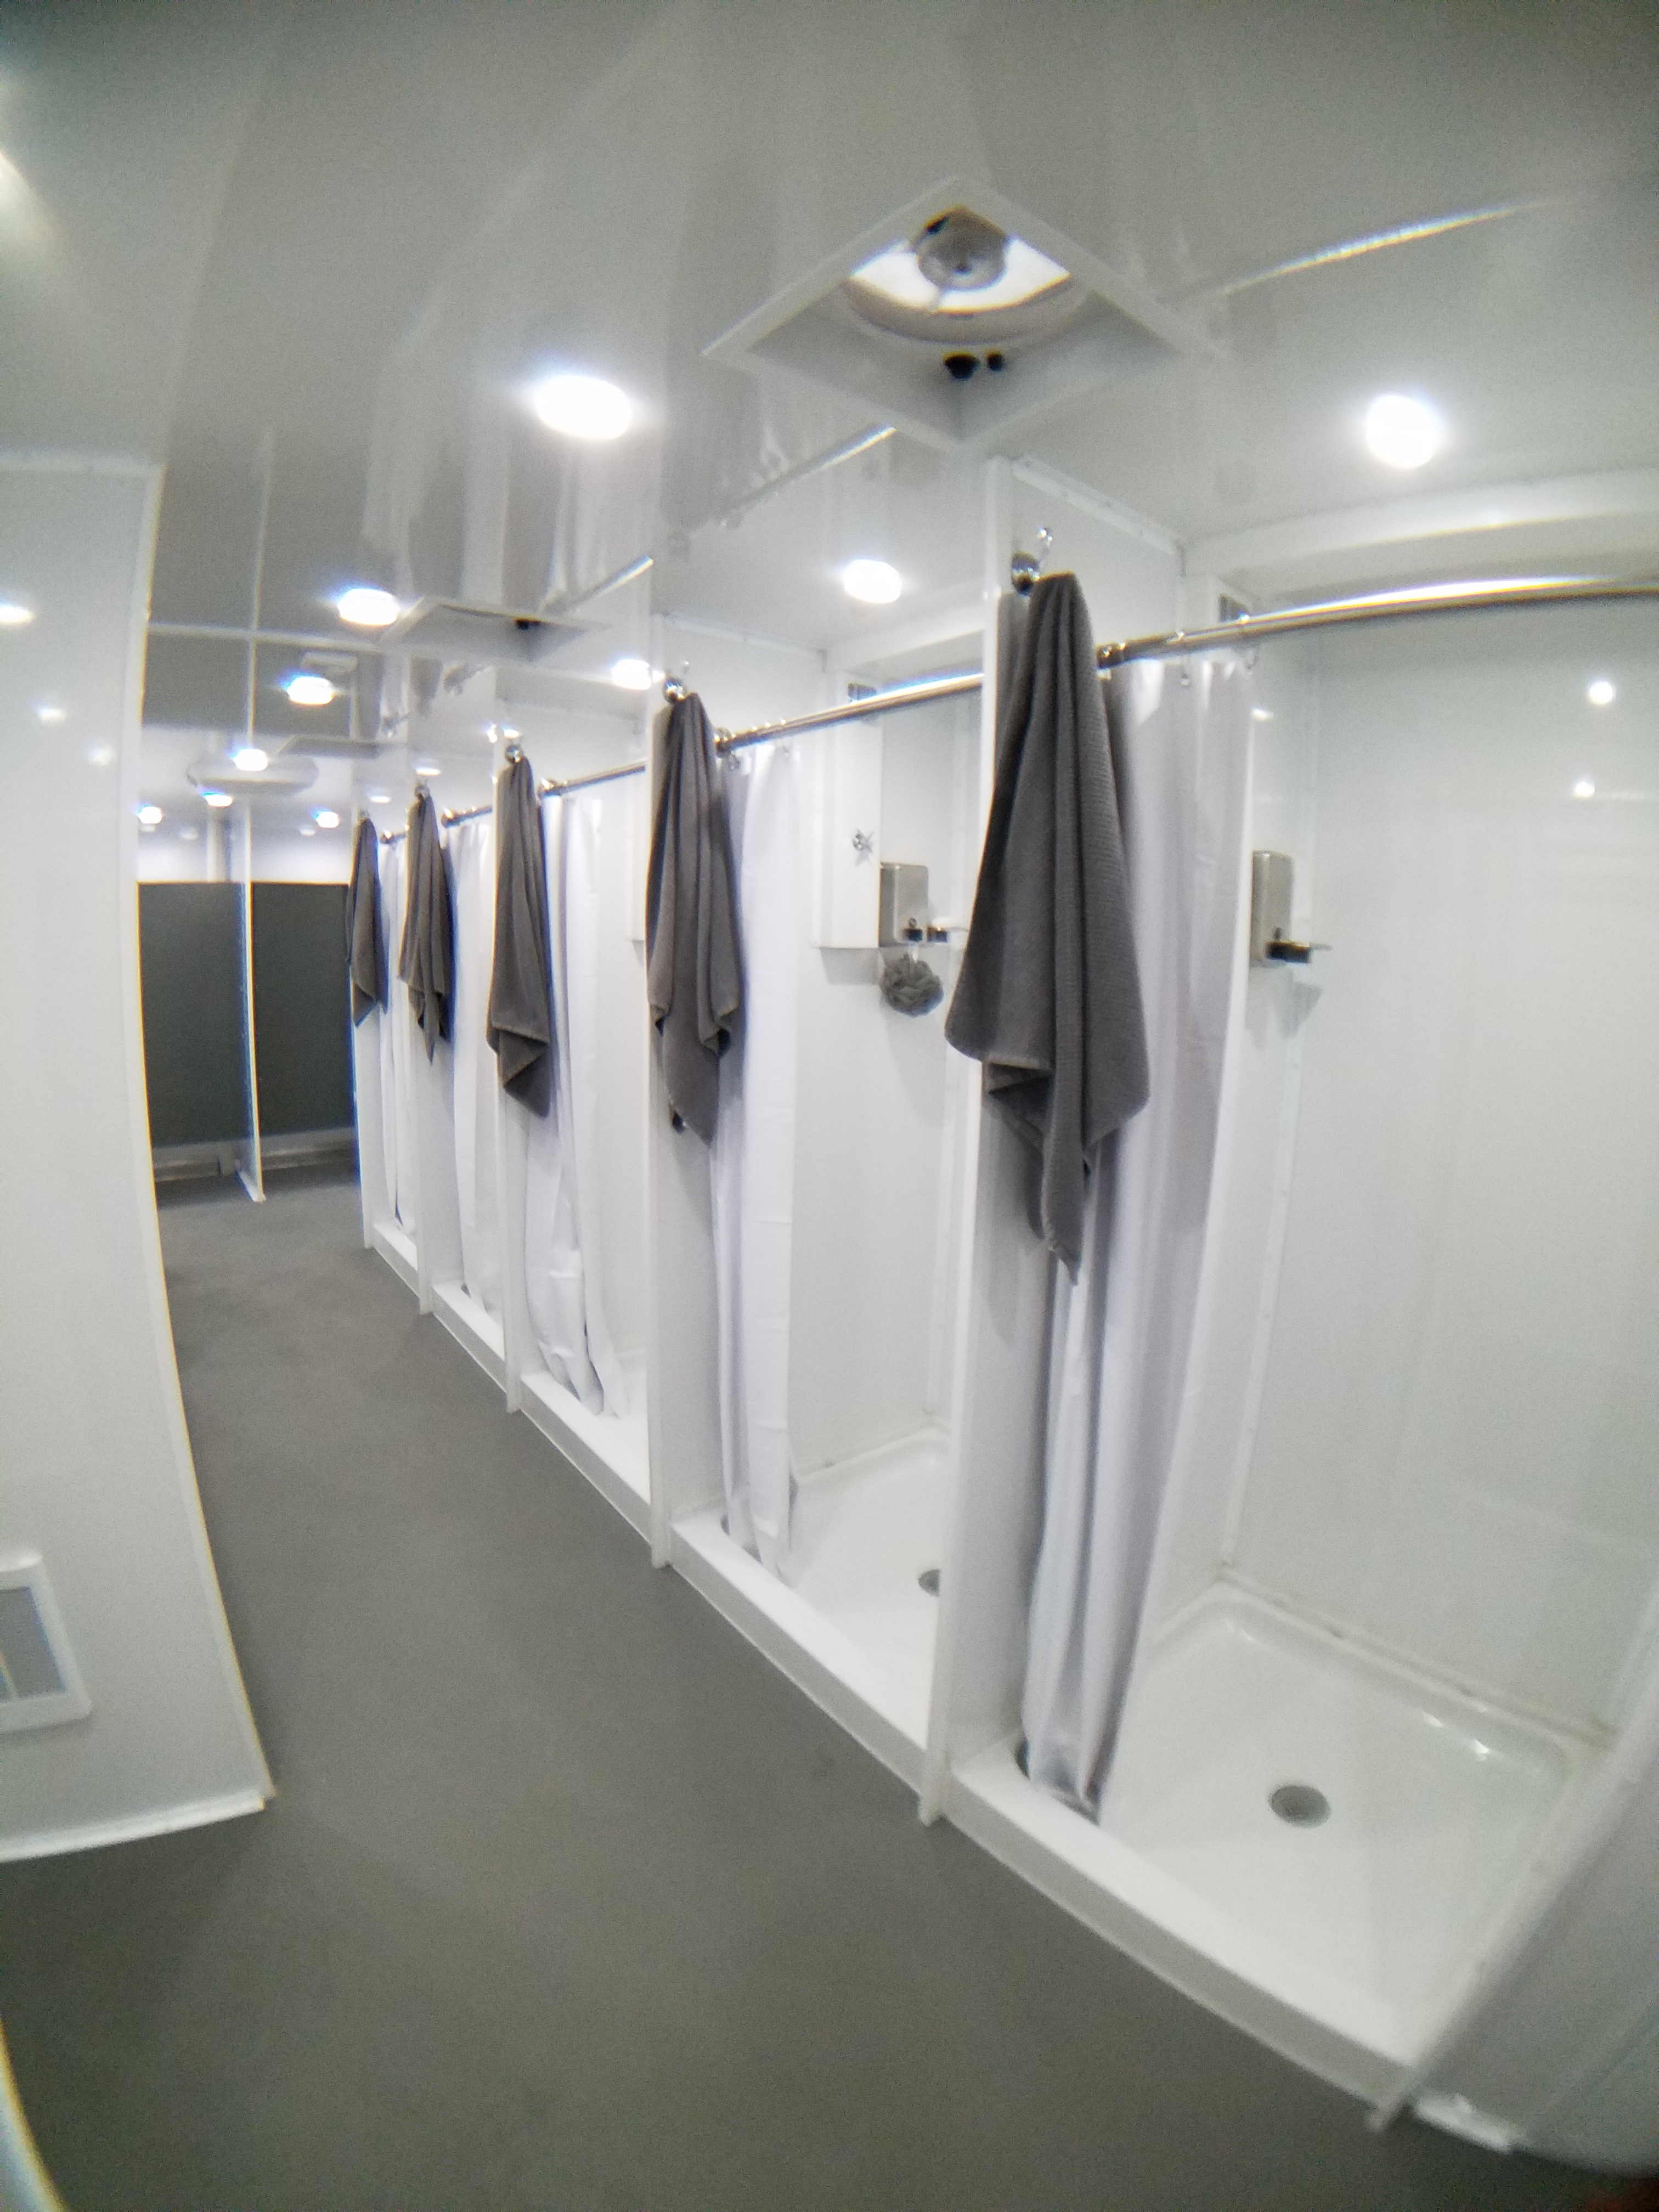 Shower Trailers for the Homeless